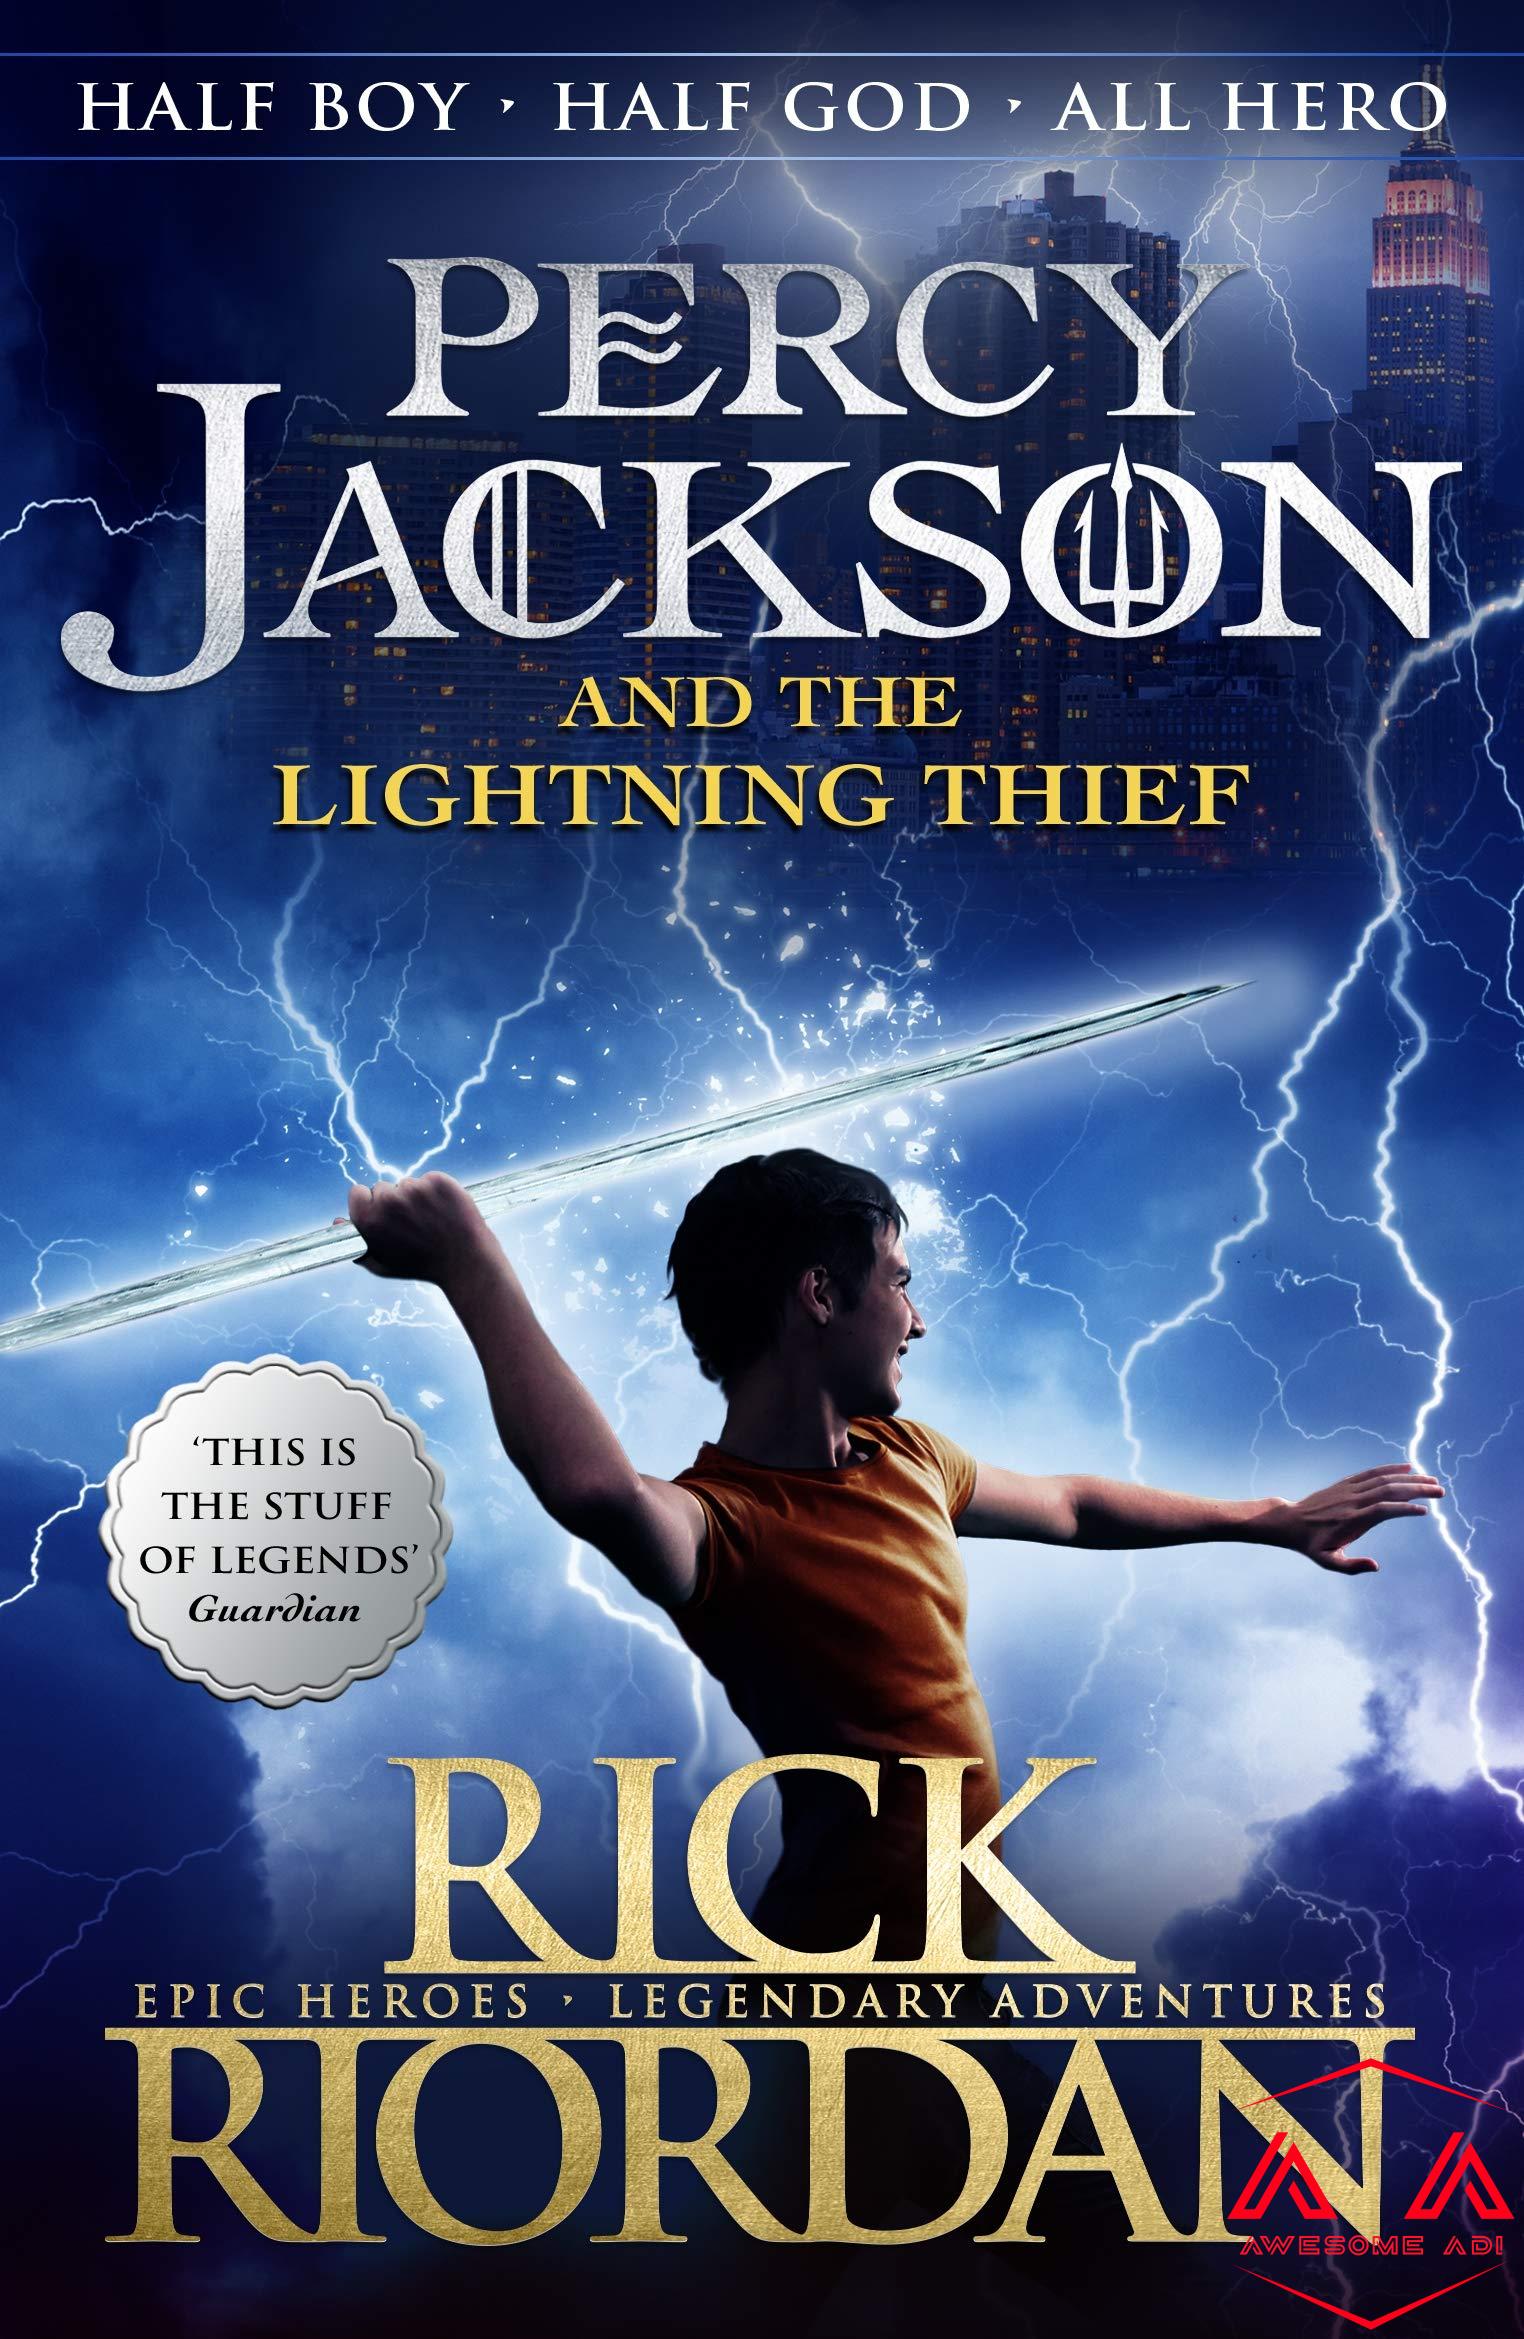 book review of percy jackson